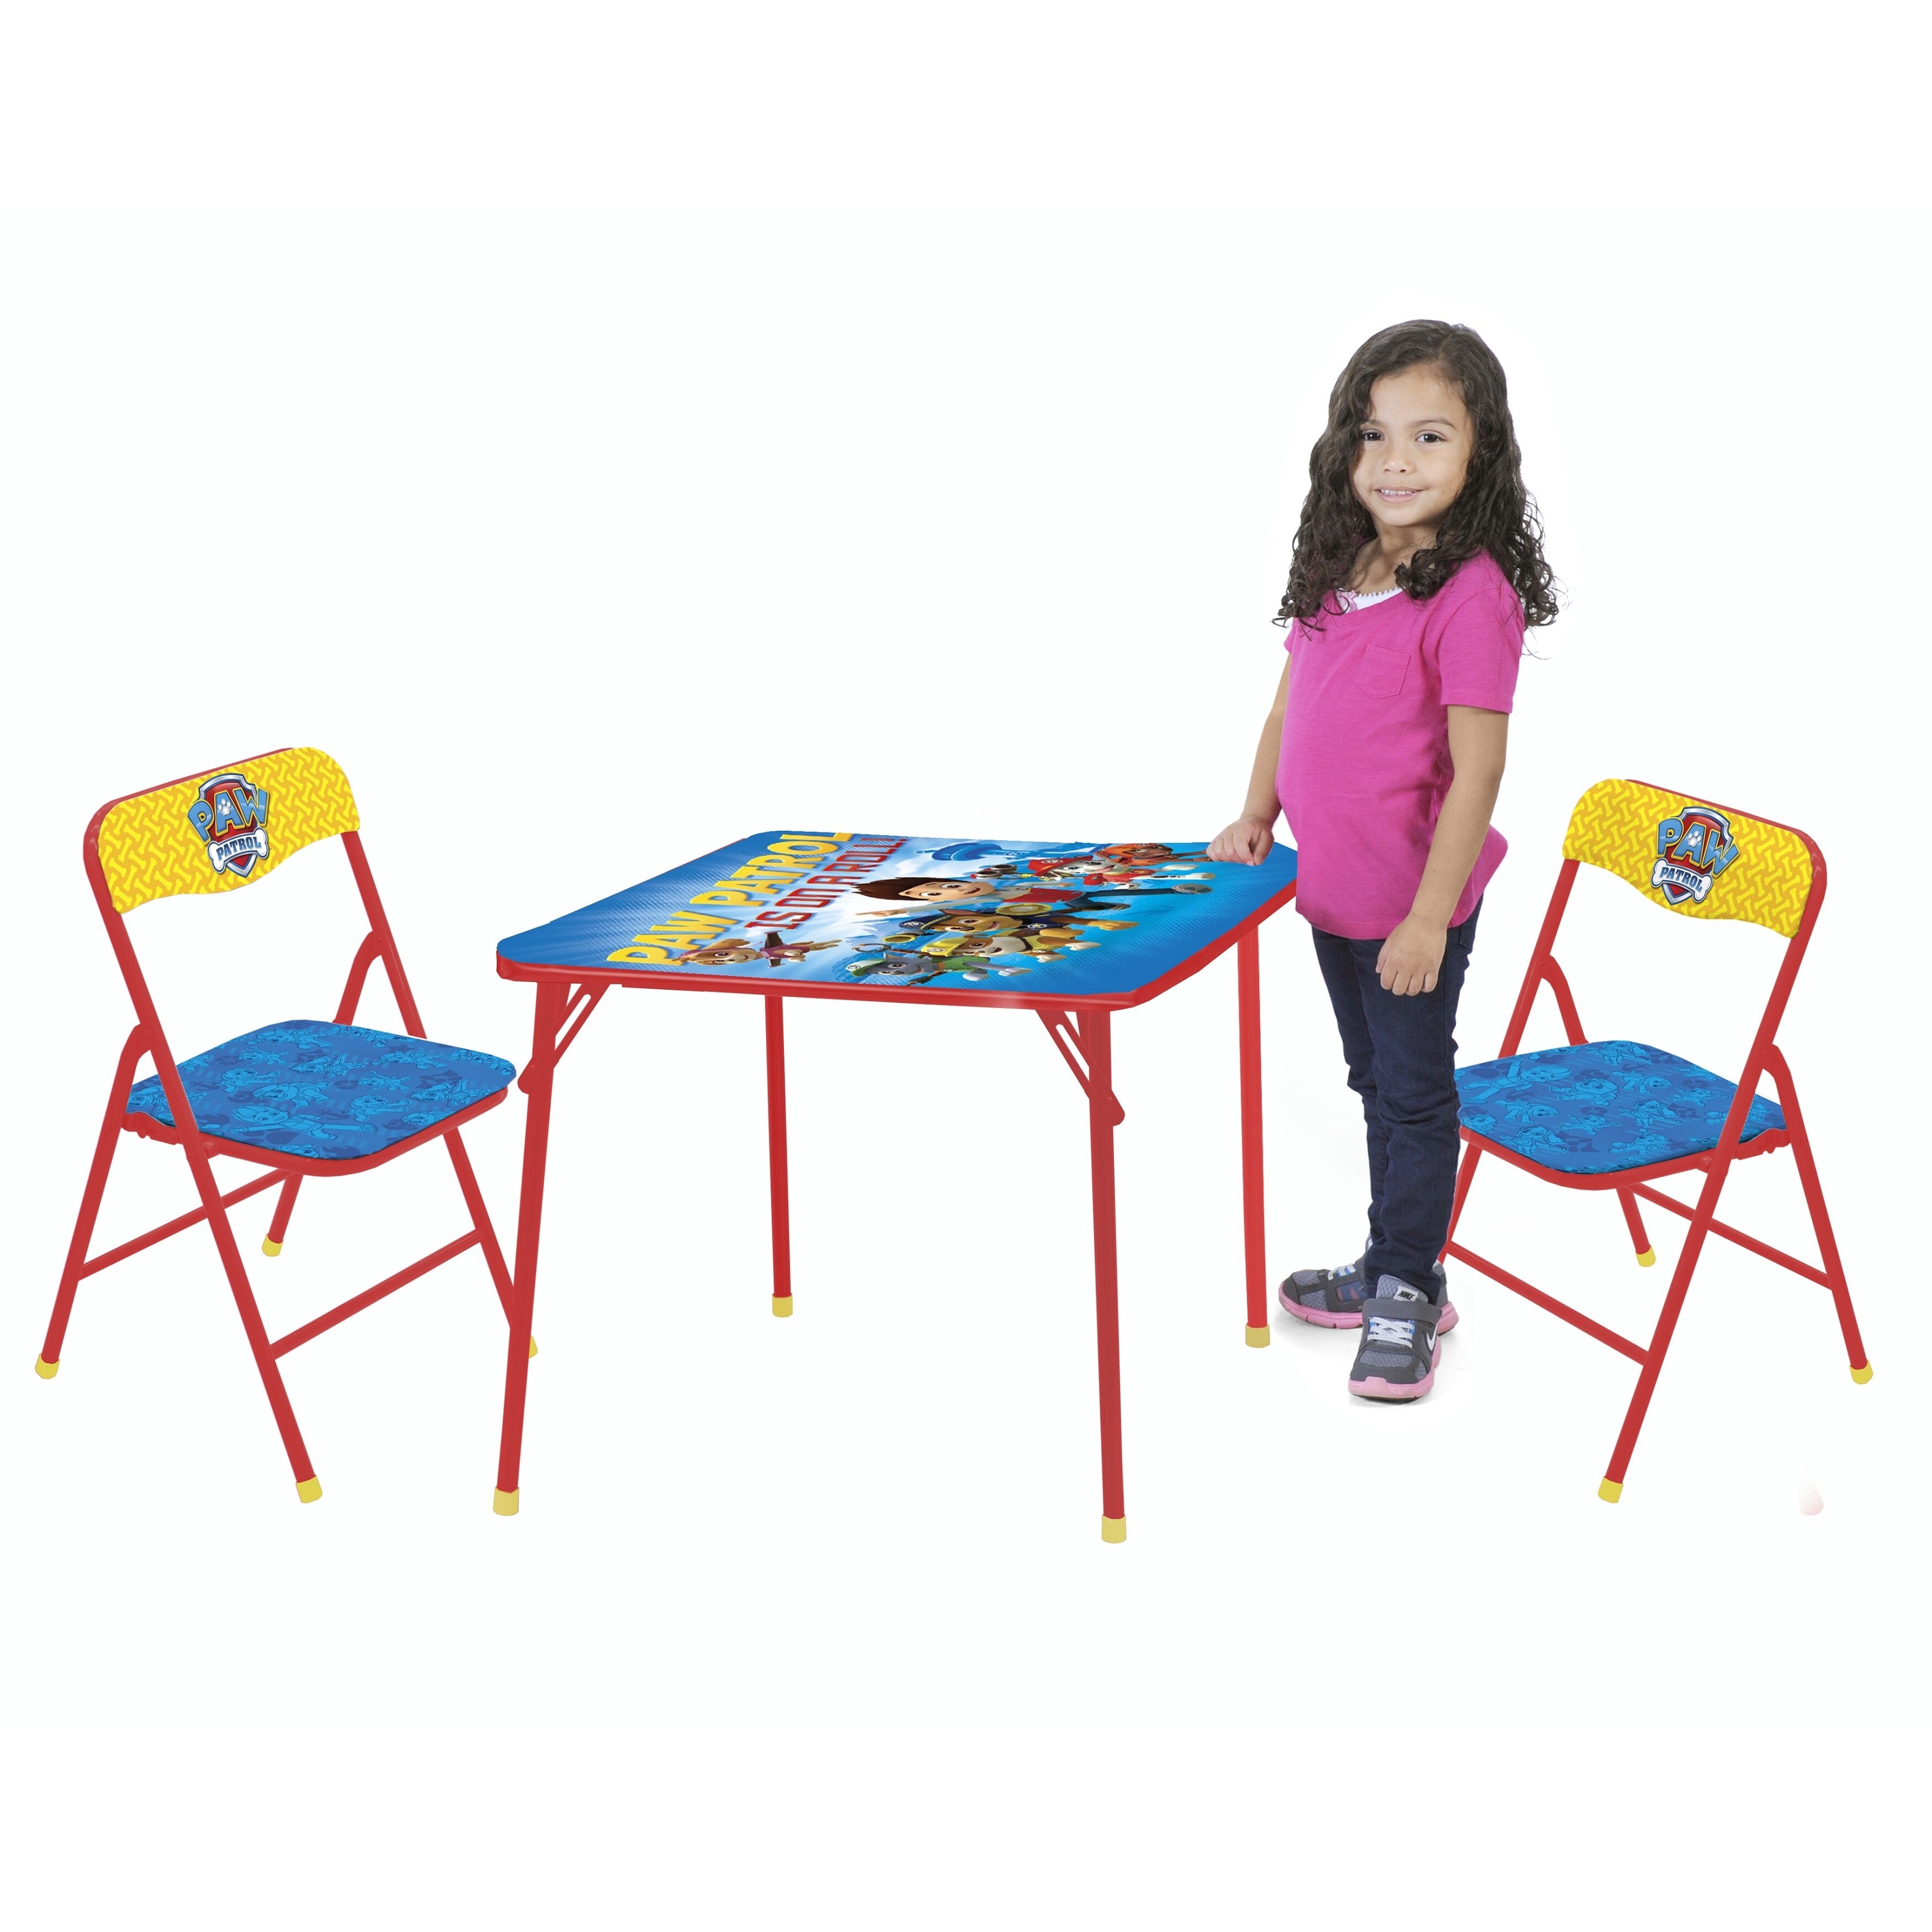 nickelodeon paw patrol table and chairs 3piece set